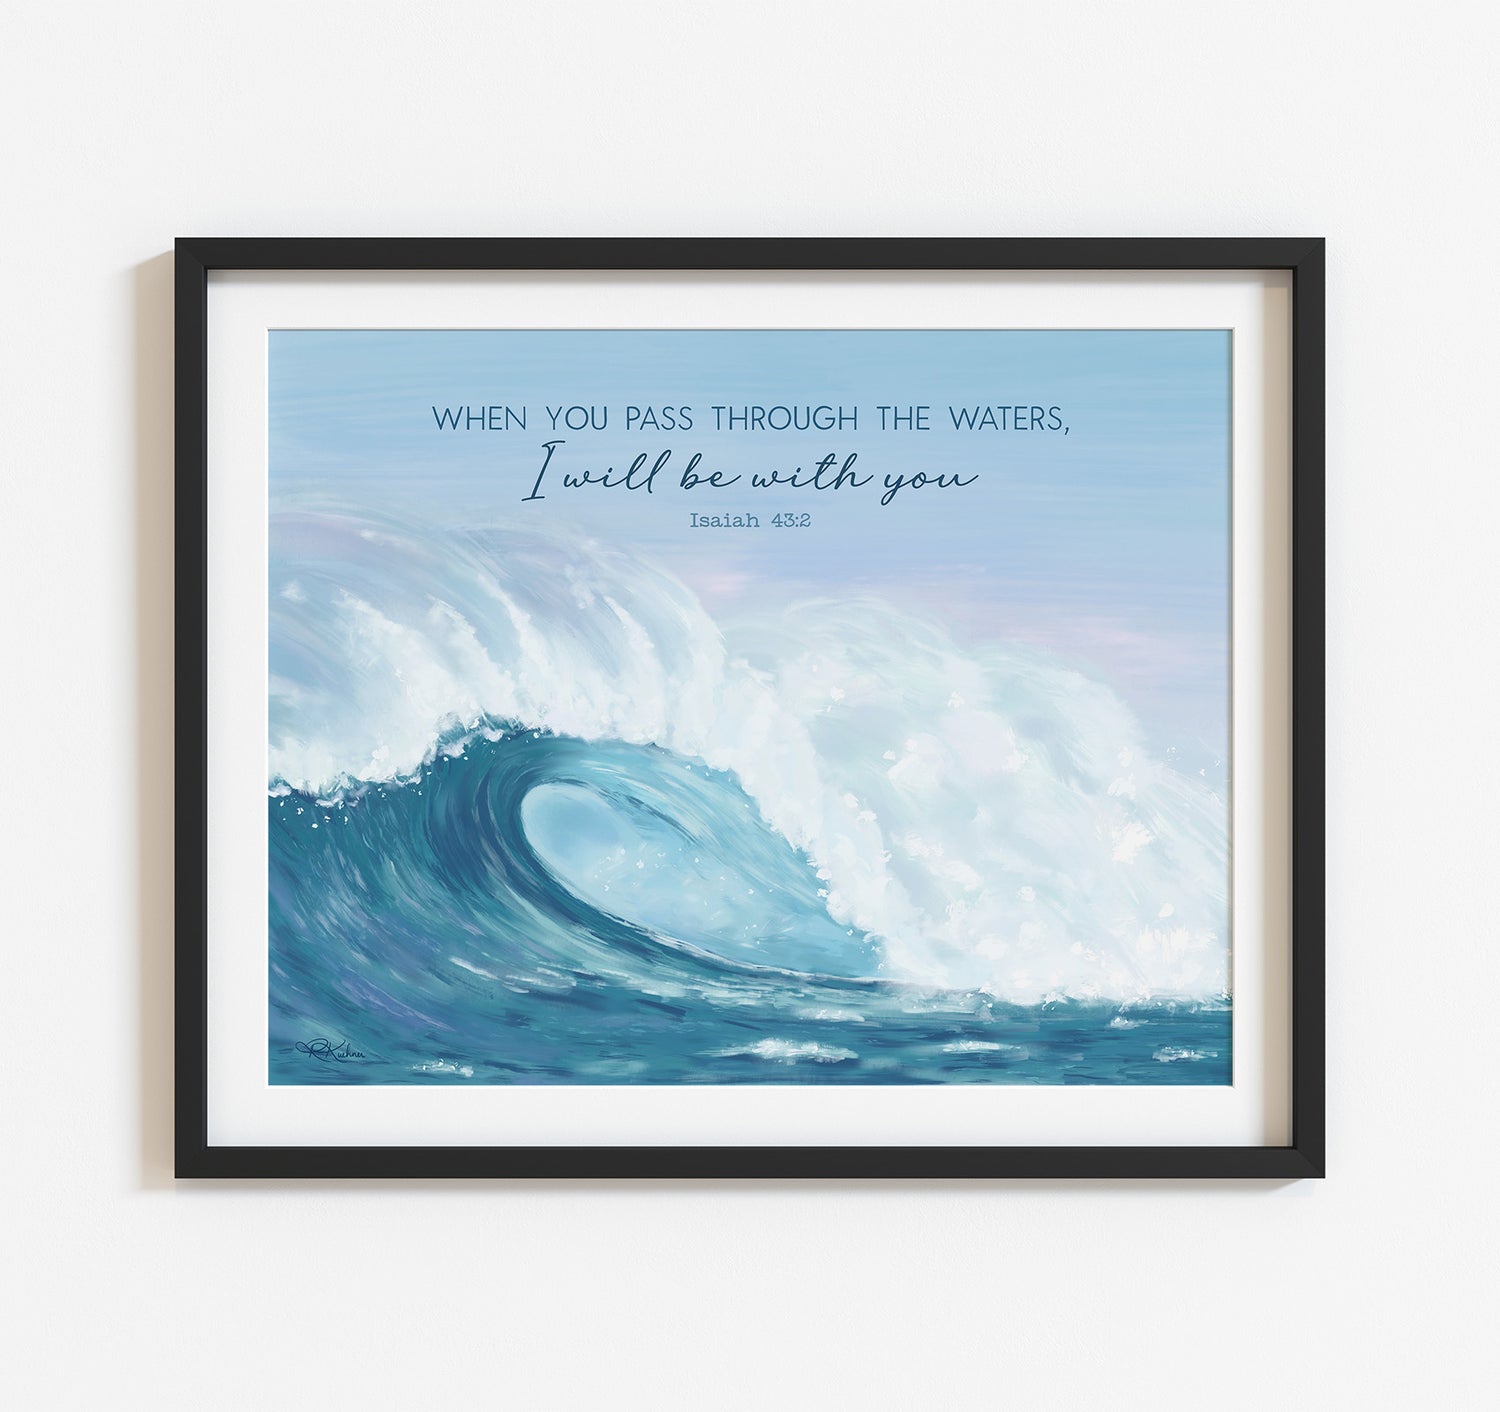 Christian art print of an ocean wave with the Isaiah 43:2 Bible verse &quot;when you pass through the waters, I will be with you.&quot;